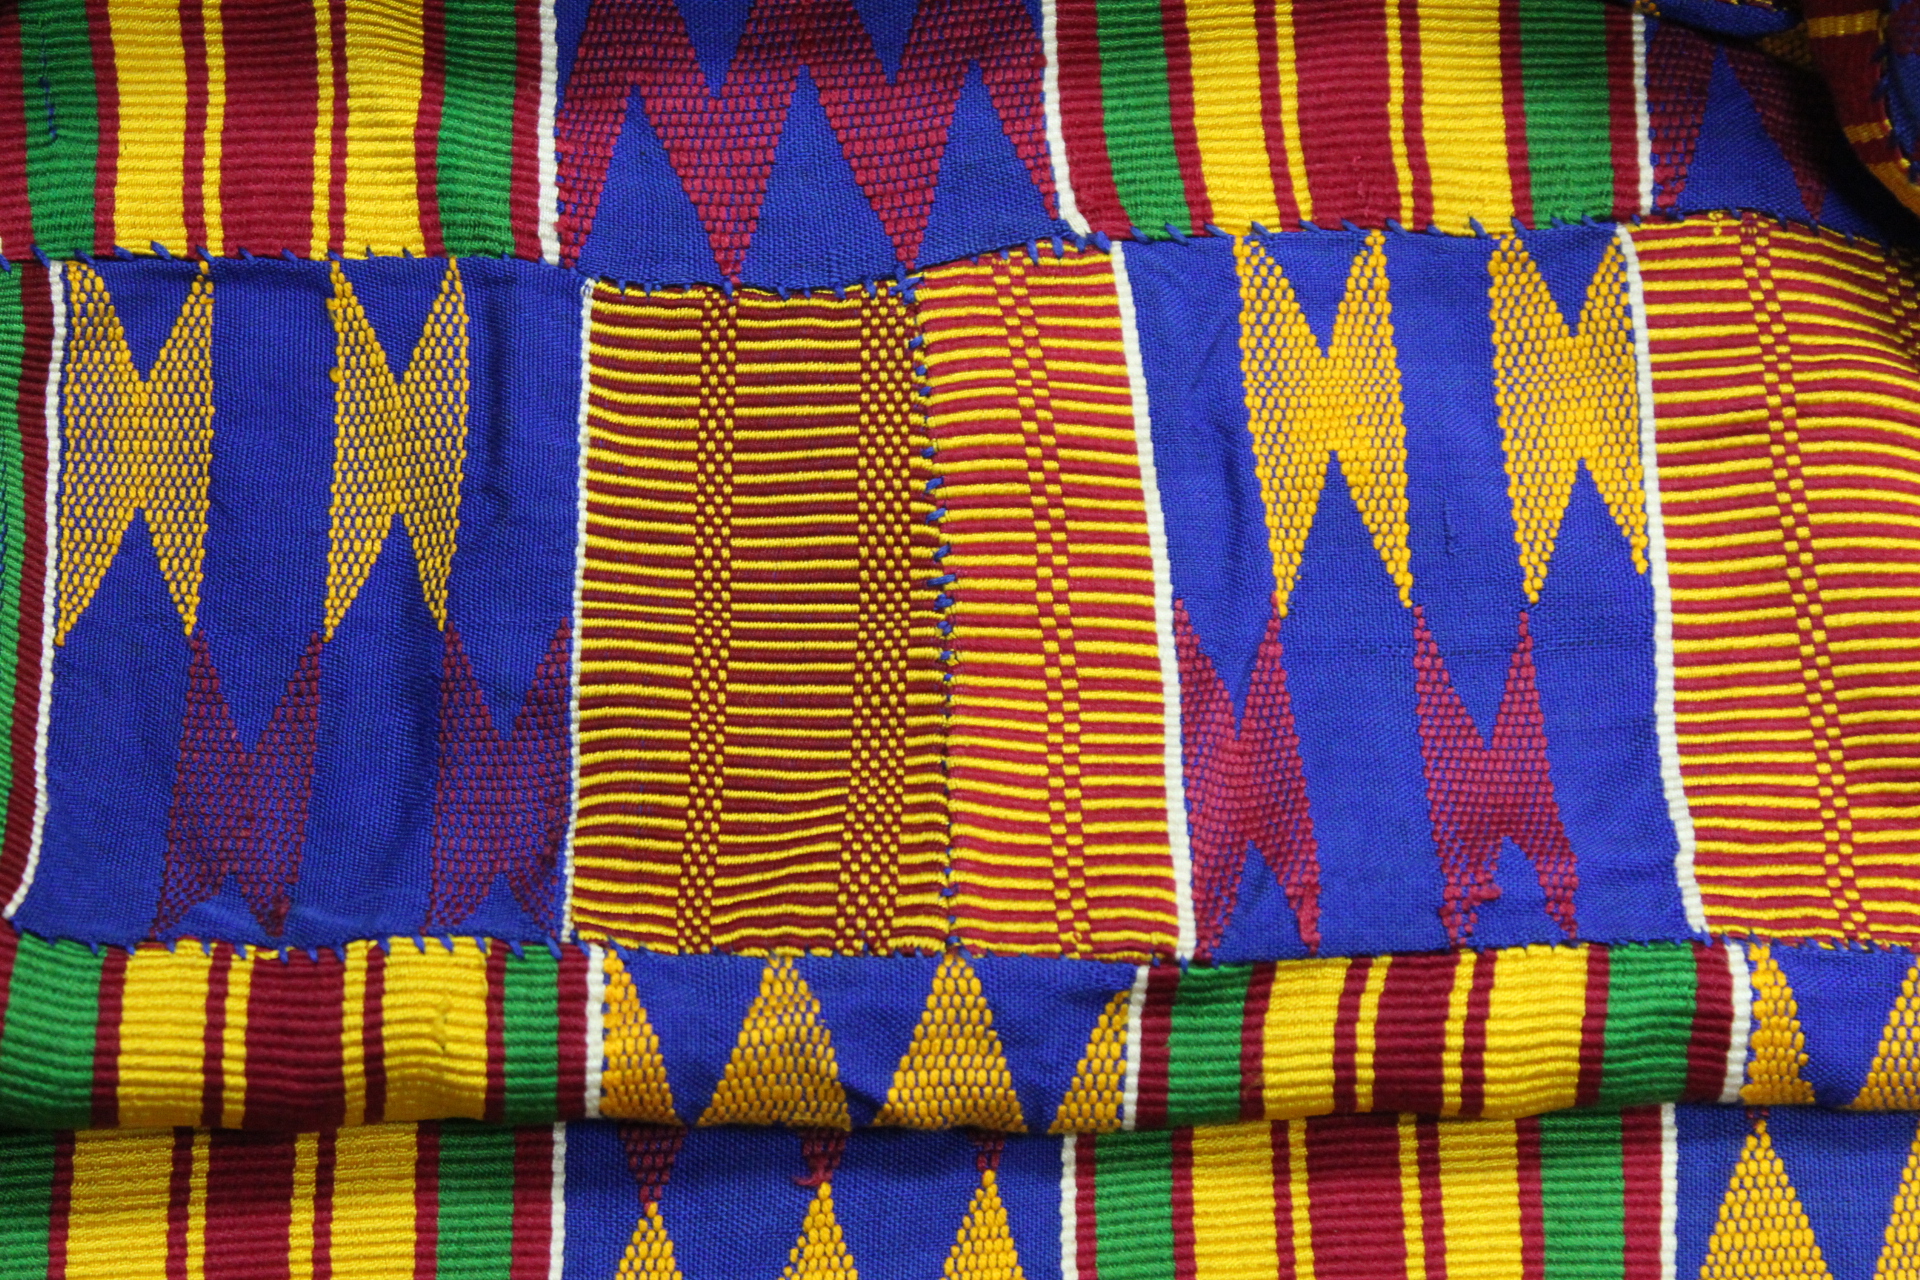 African Asanti Kente cloth in woven silk and cotton fabrics in predominantly blue, yellow, green and - Image 8 of 11